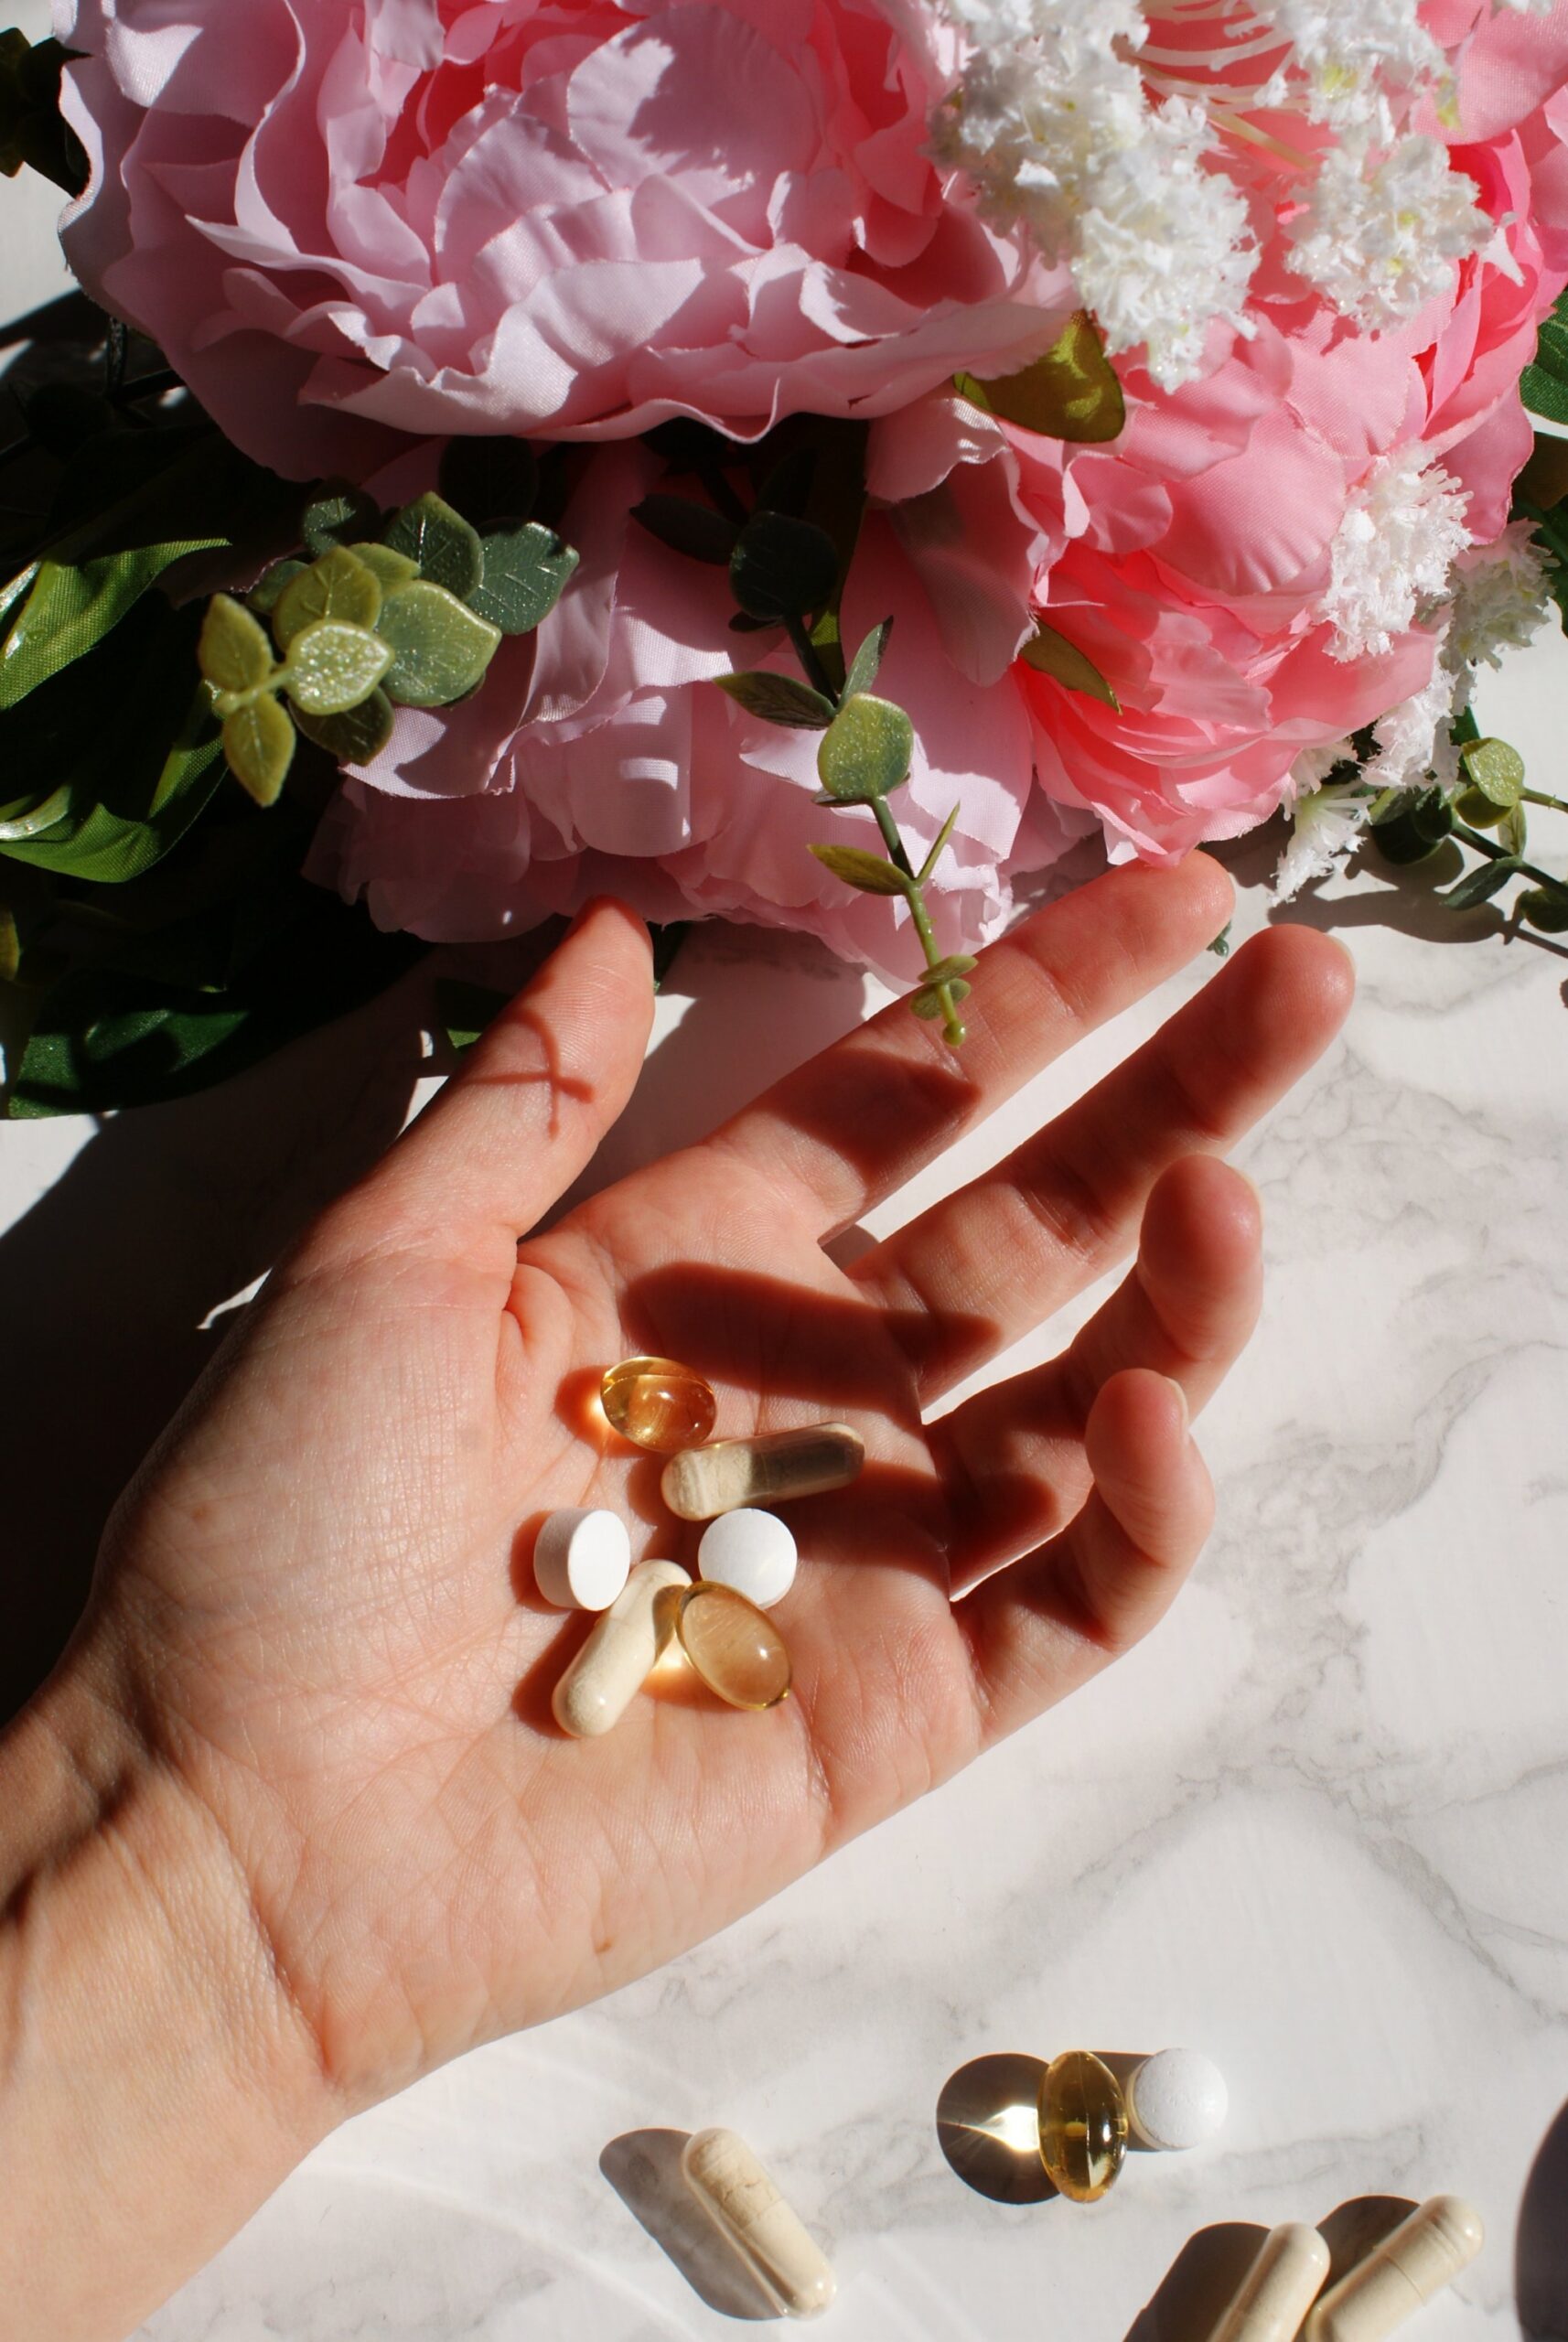 supplements beauty skincare tips guide